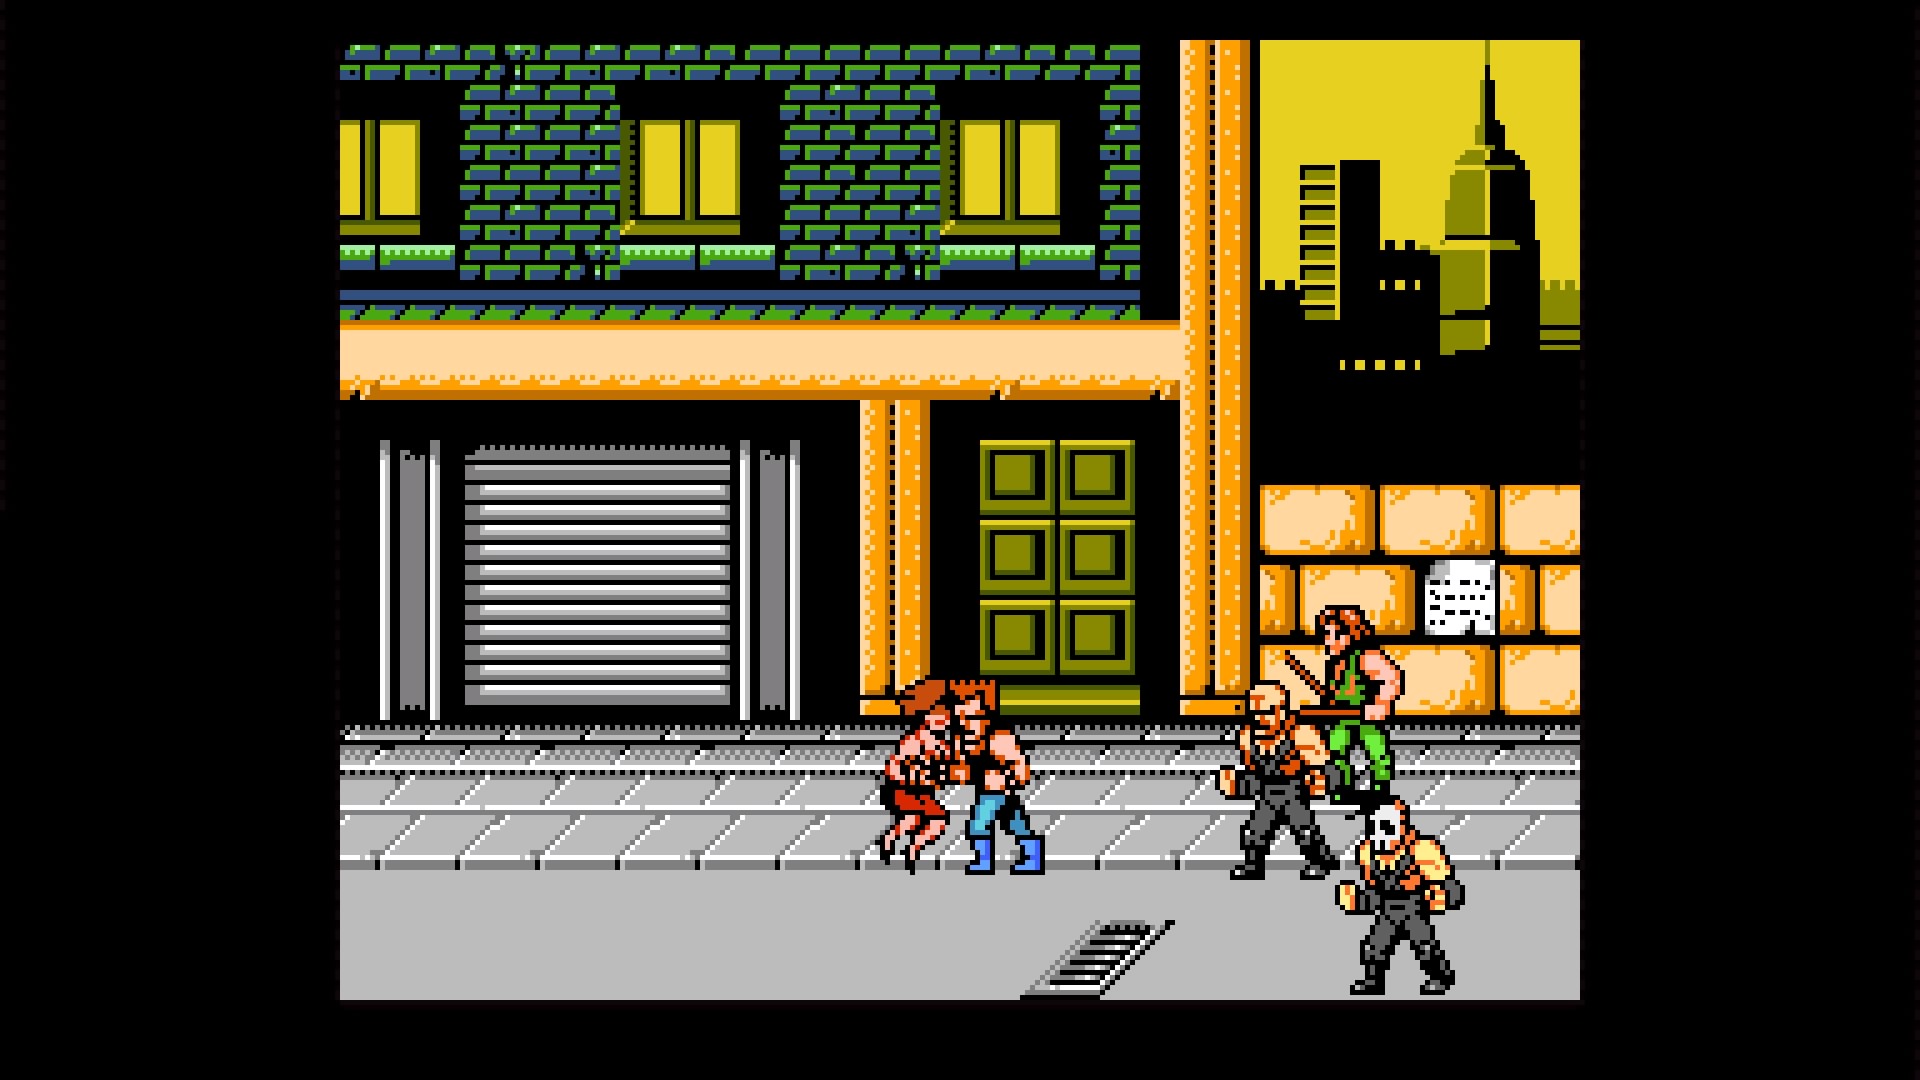 Double Dragon 4 Review –